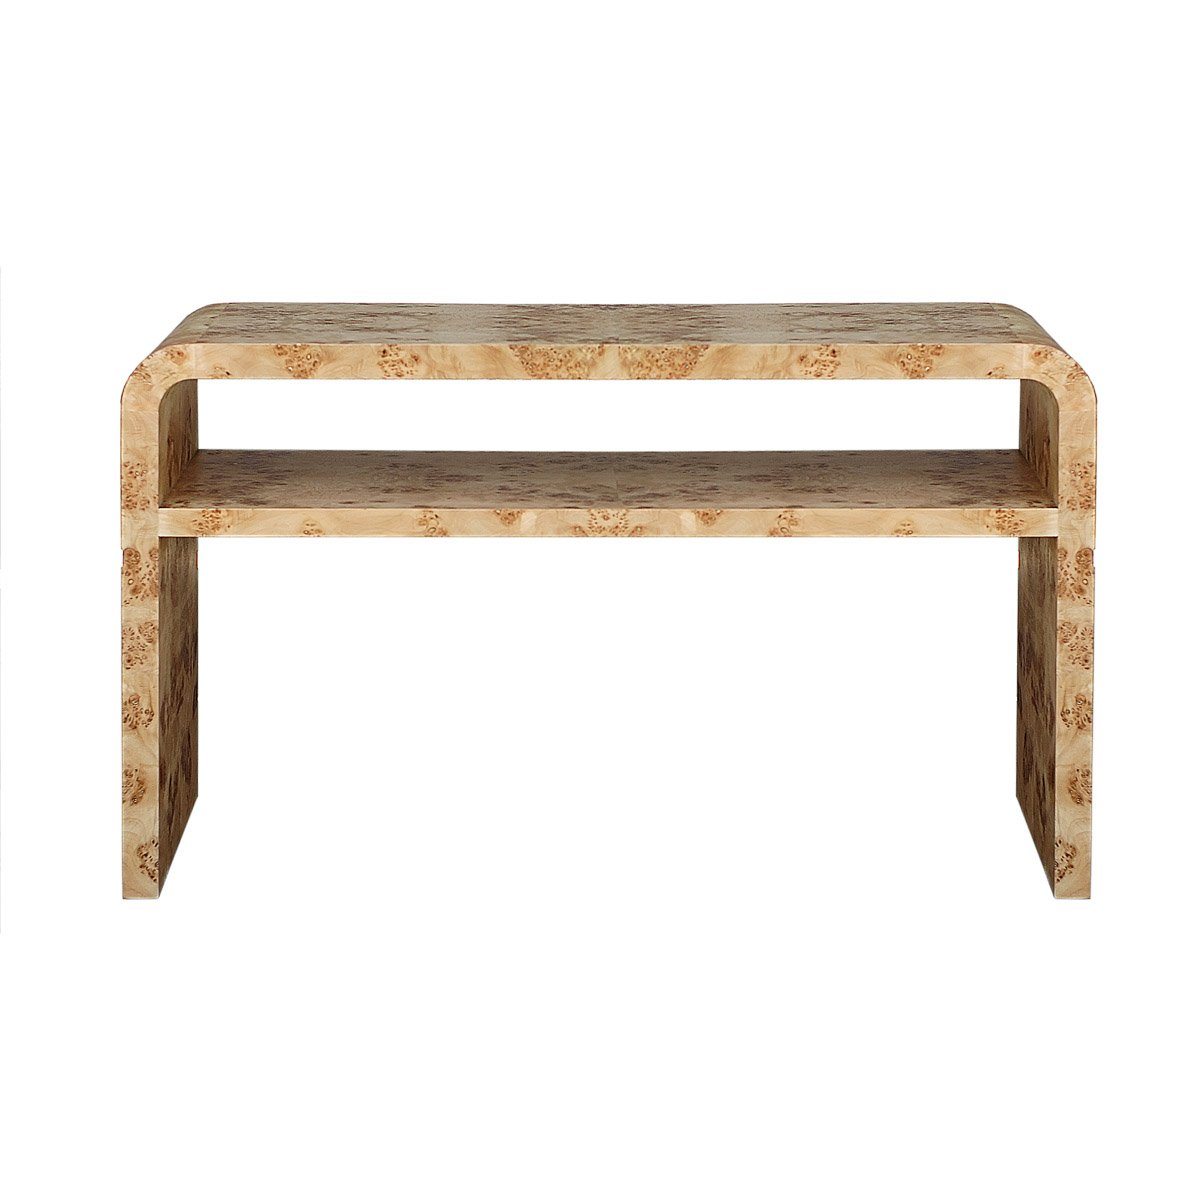 Burl Wood Console Table. Front view.